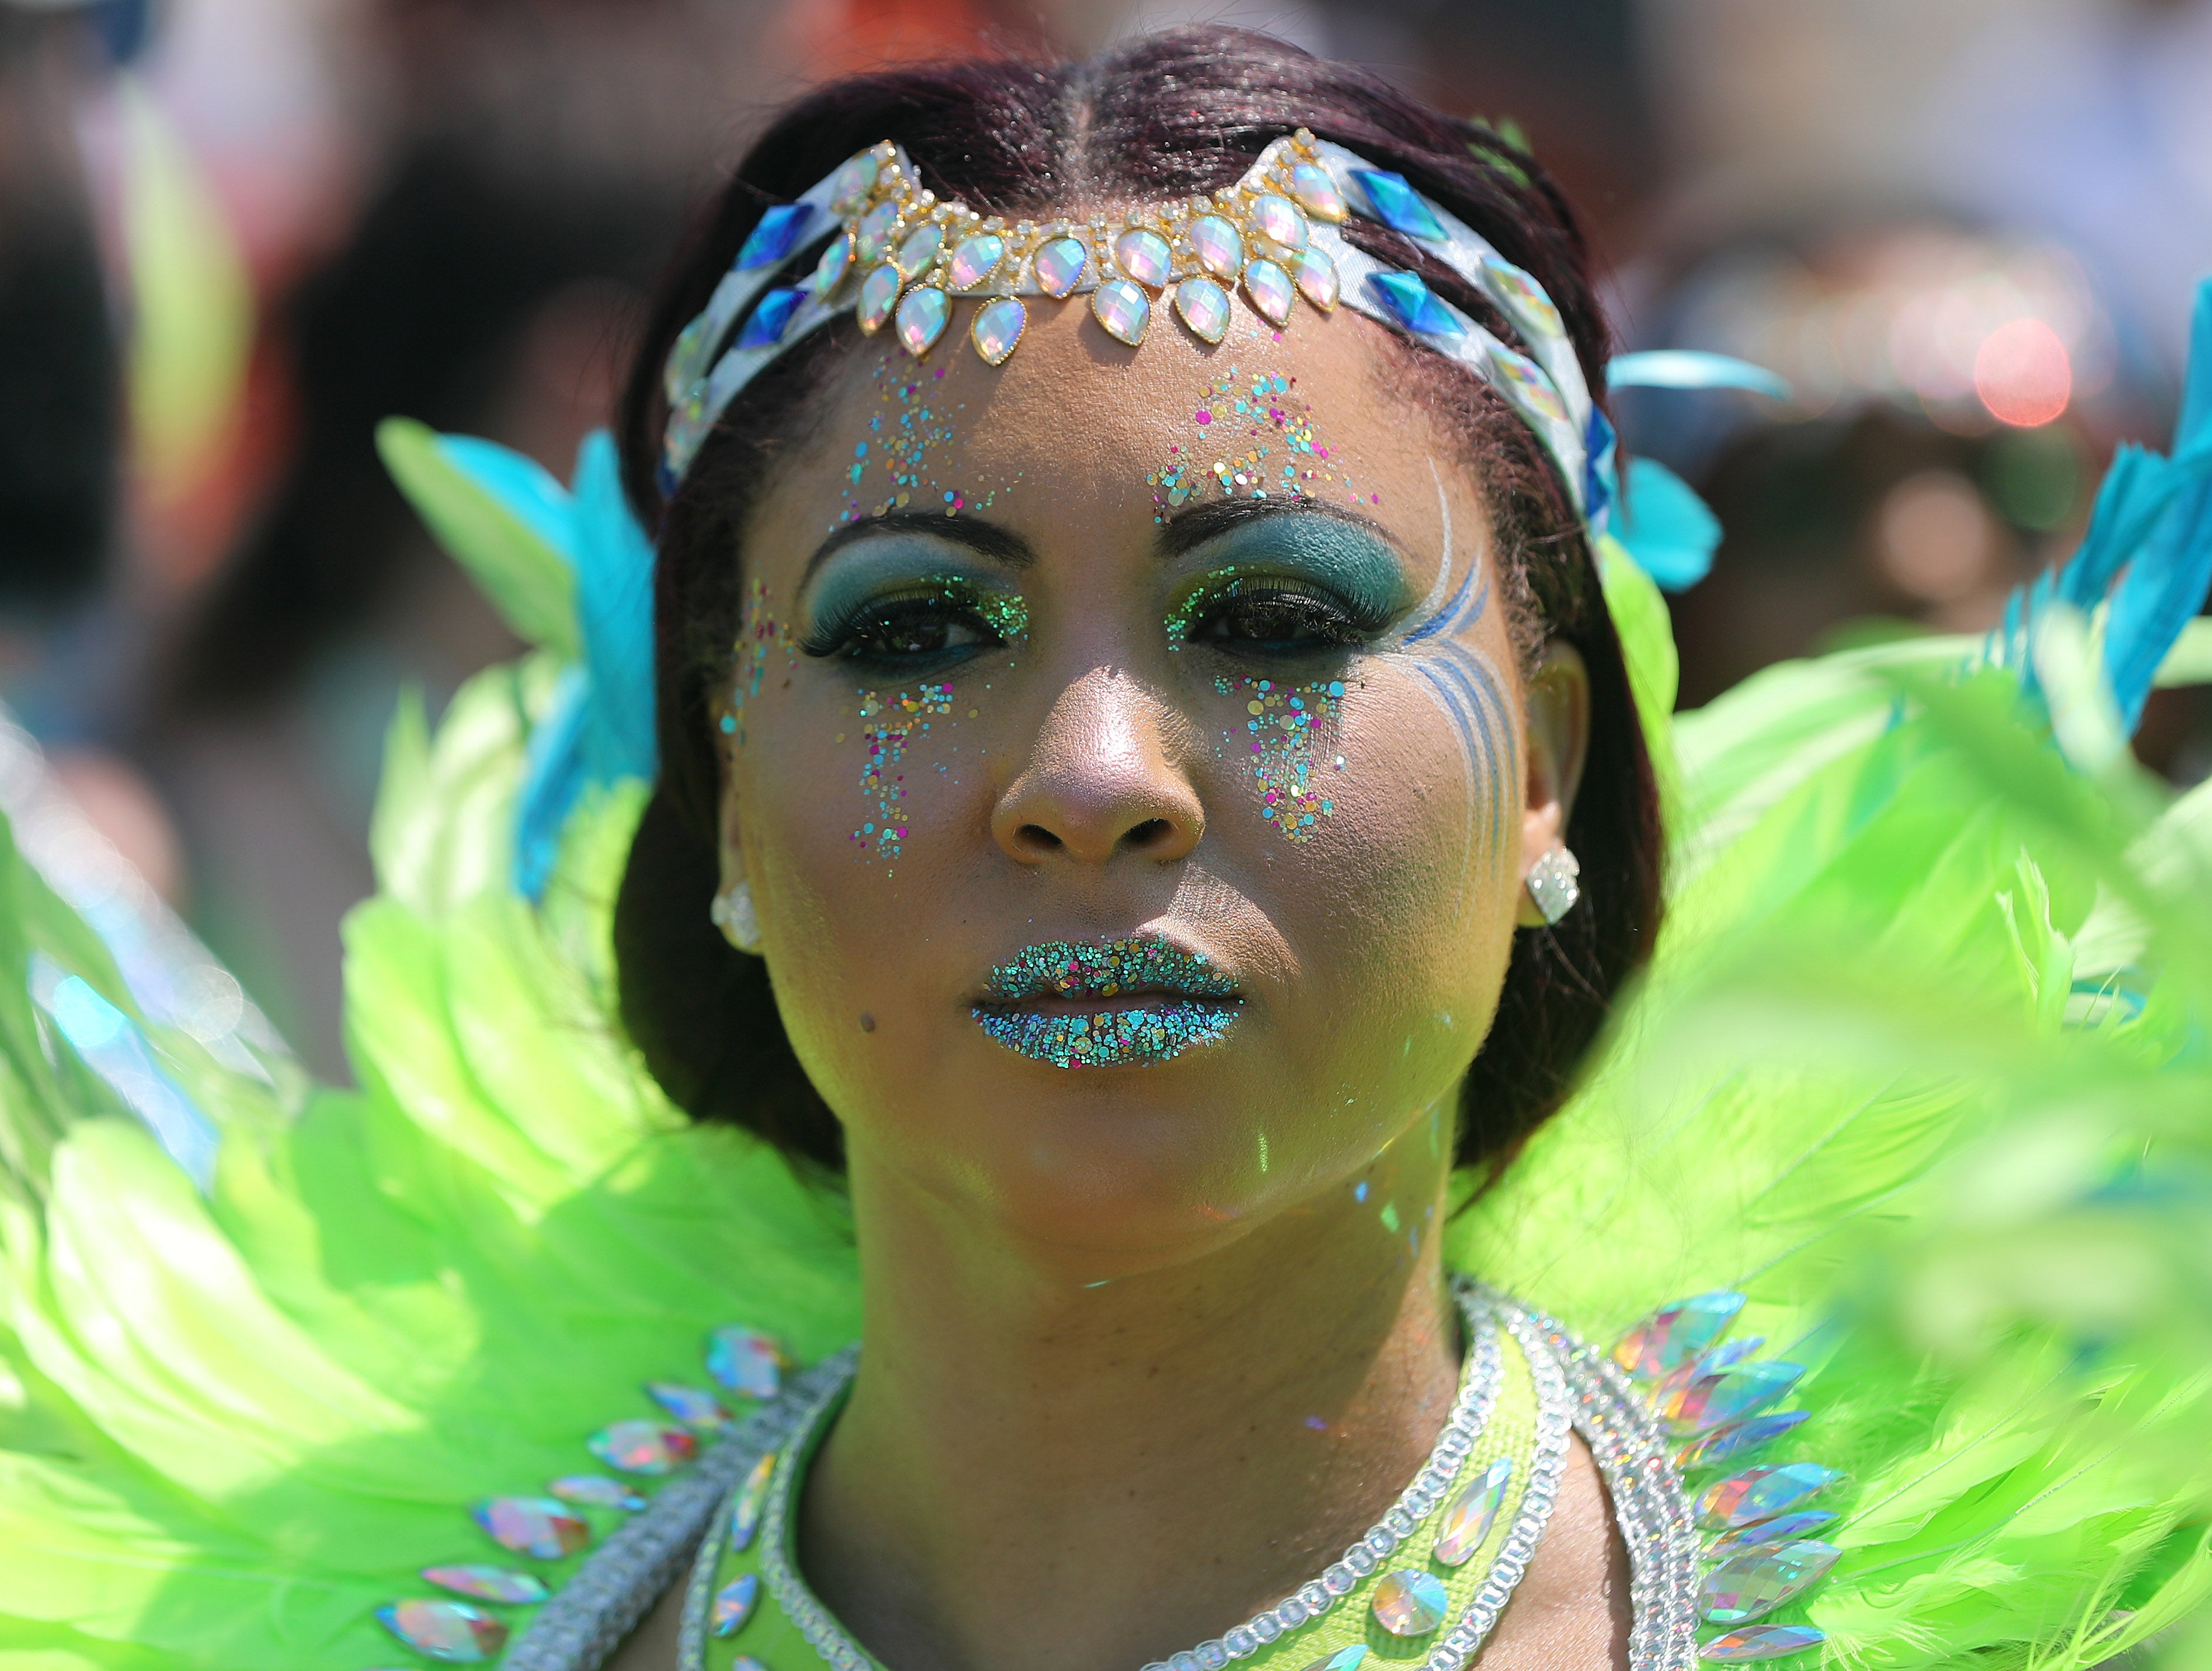 Caribana 2019 Was A Spectacular Of Black Beauty And Hair